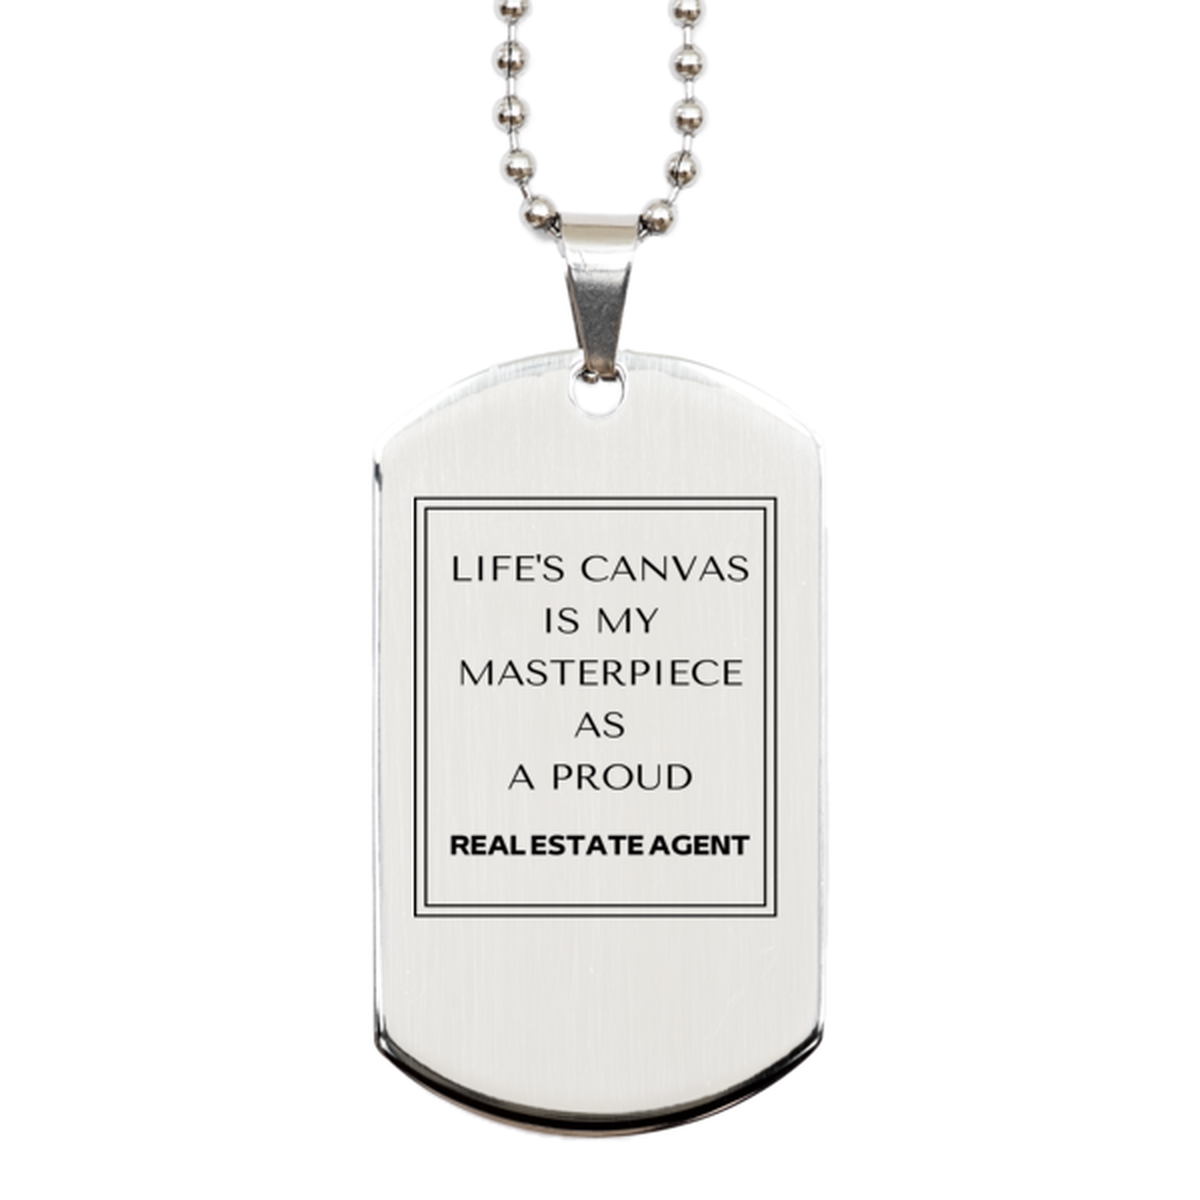 Proud Real Estate Agent Gifts, Life's canvas is my masterpiece, Epic Birthday Christmas Unique Silver Dog Tag For Real Estate Agent, Coworkers, Men, Women, Friends